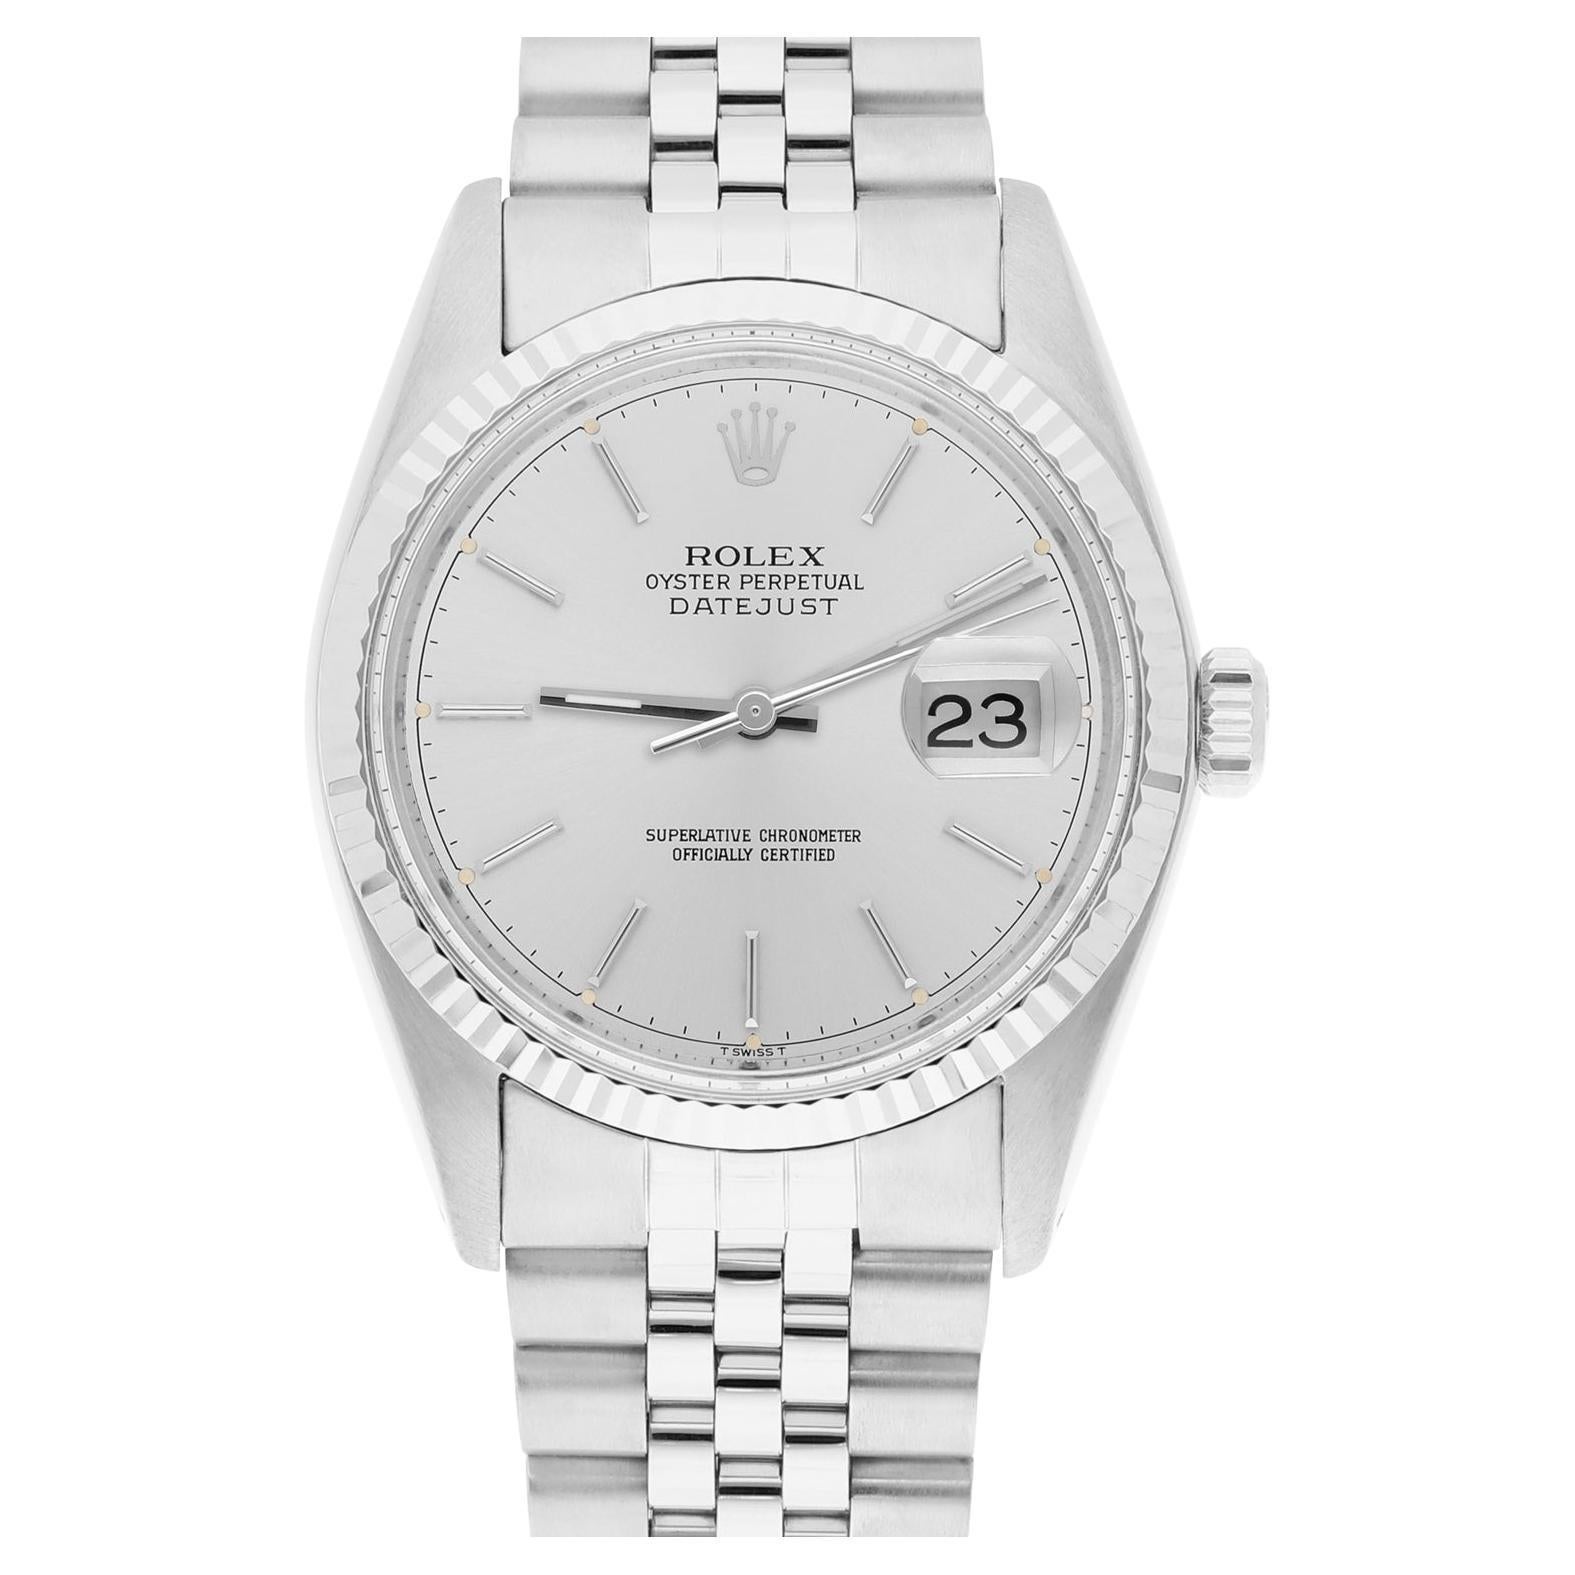 Rolex Datejust 36mm Stainless Steel 16014 Silver Index Dial, Circa 1987